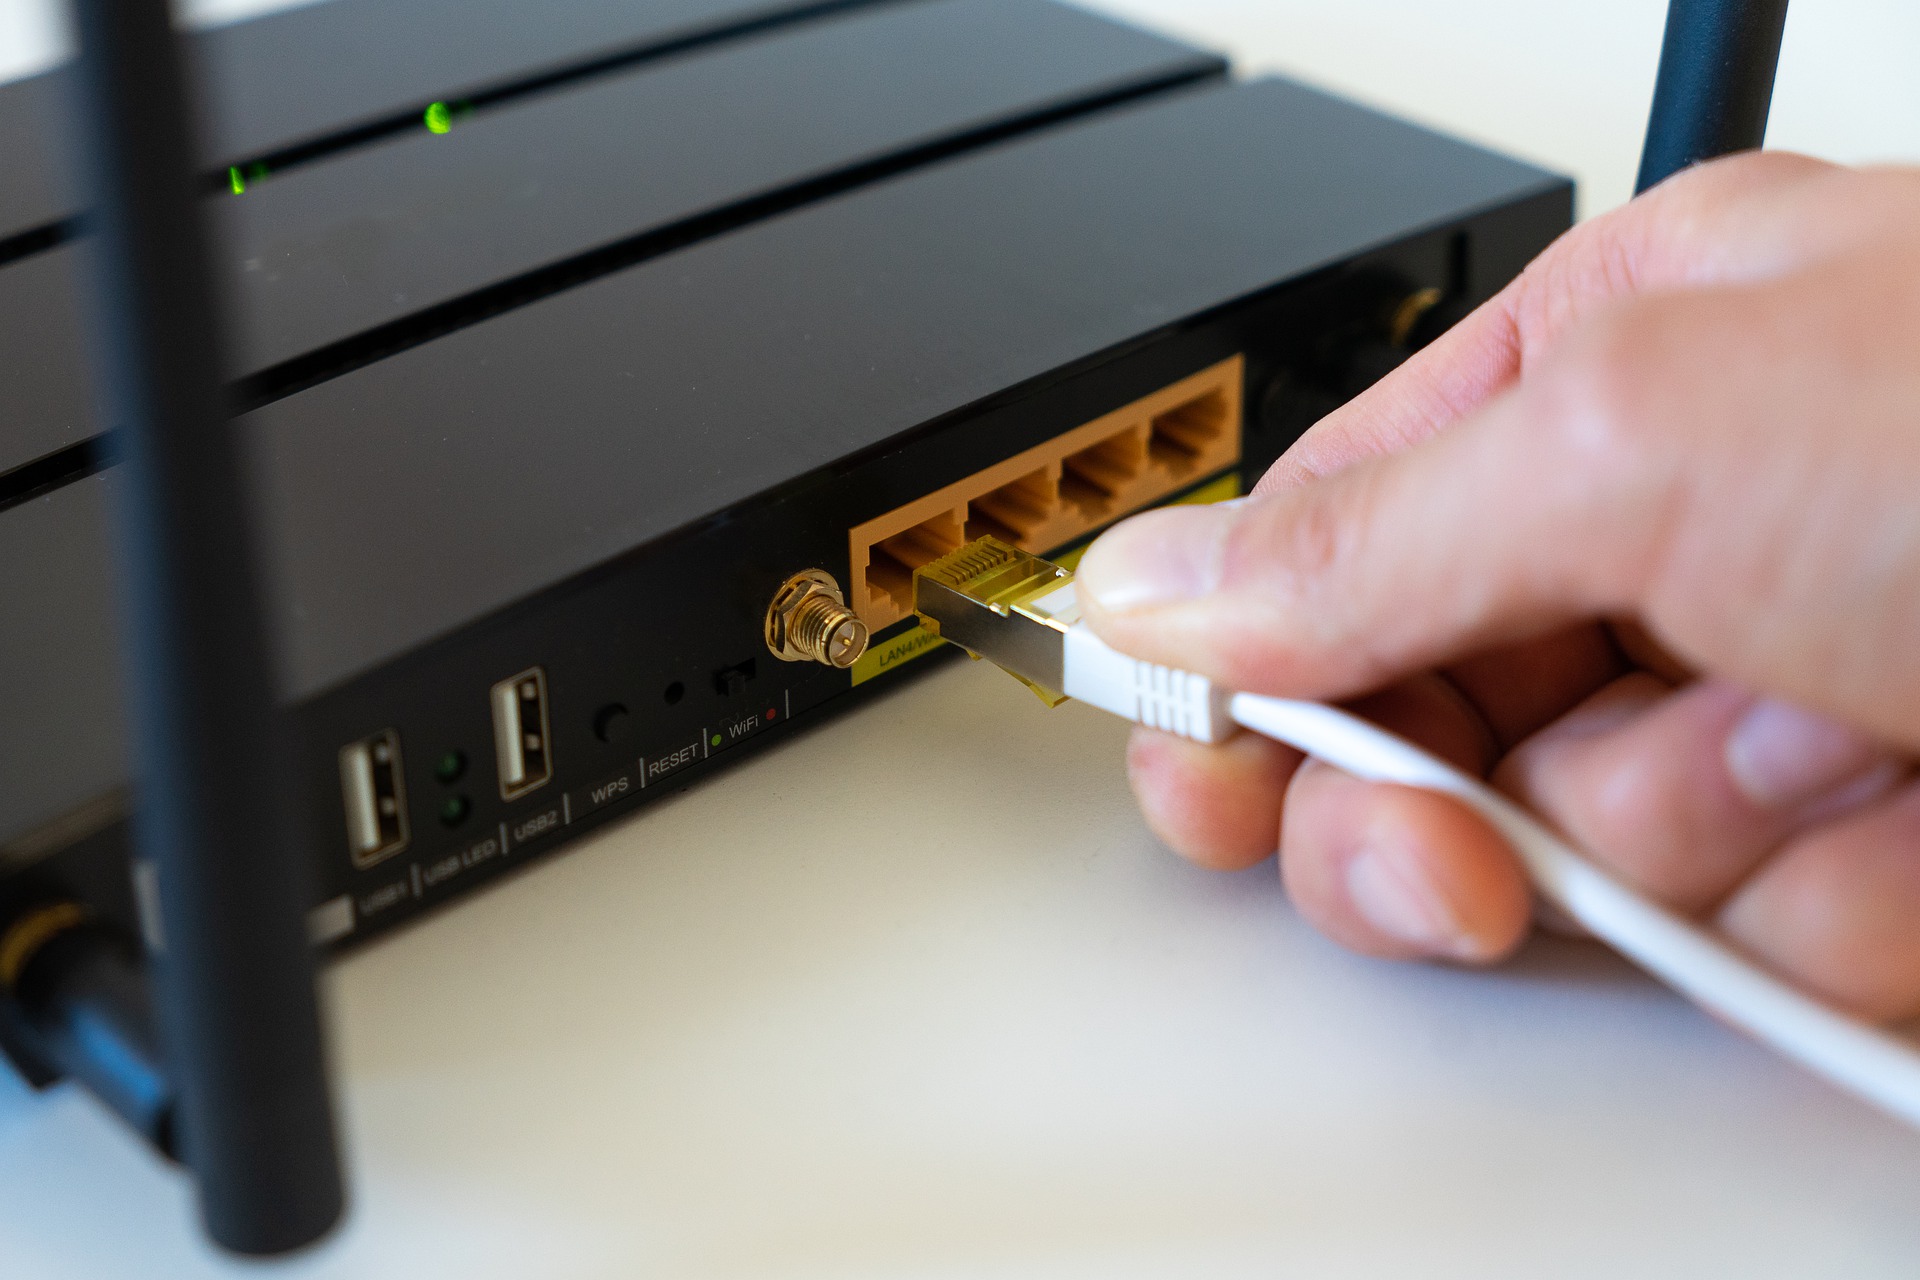 cyber attackers target home routers